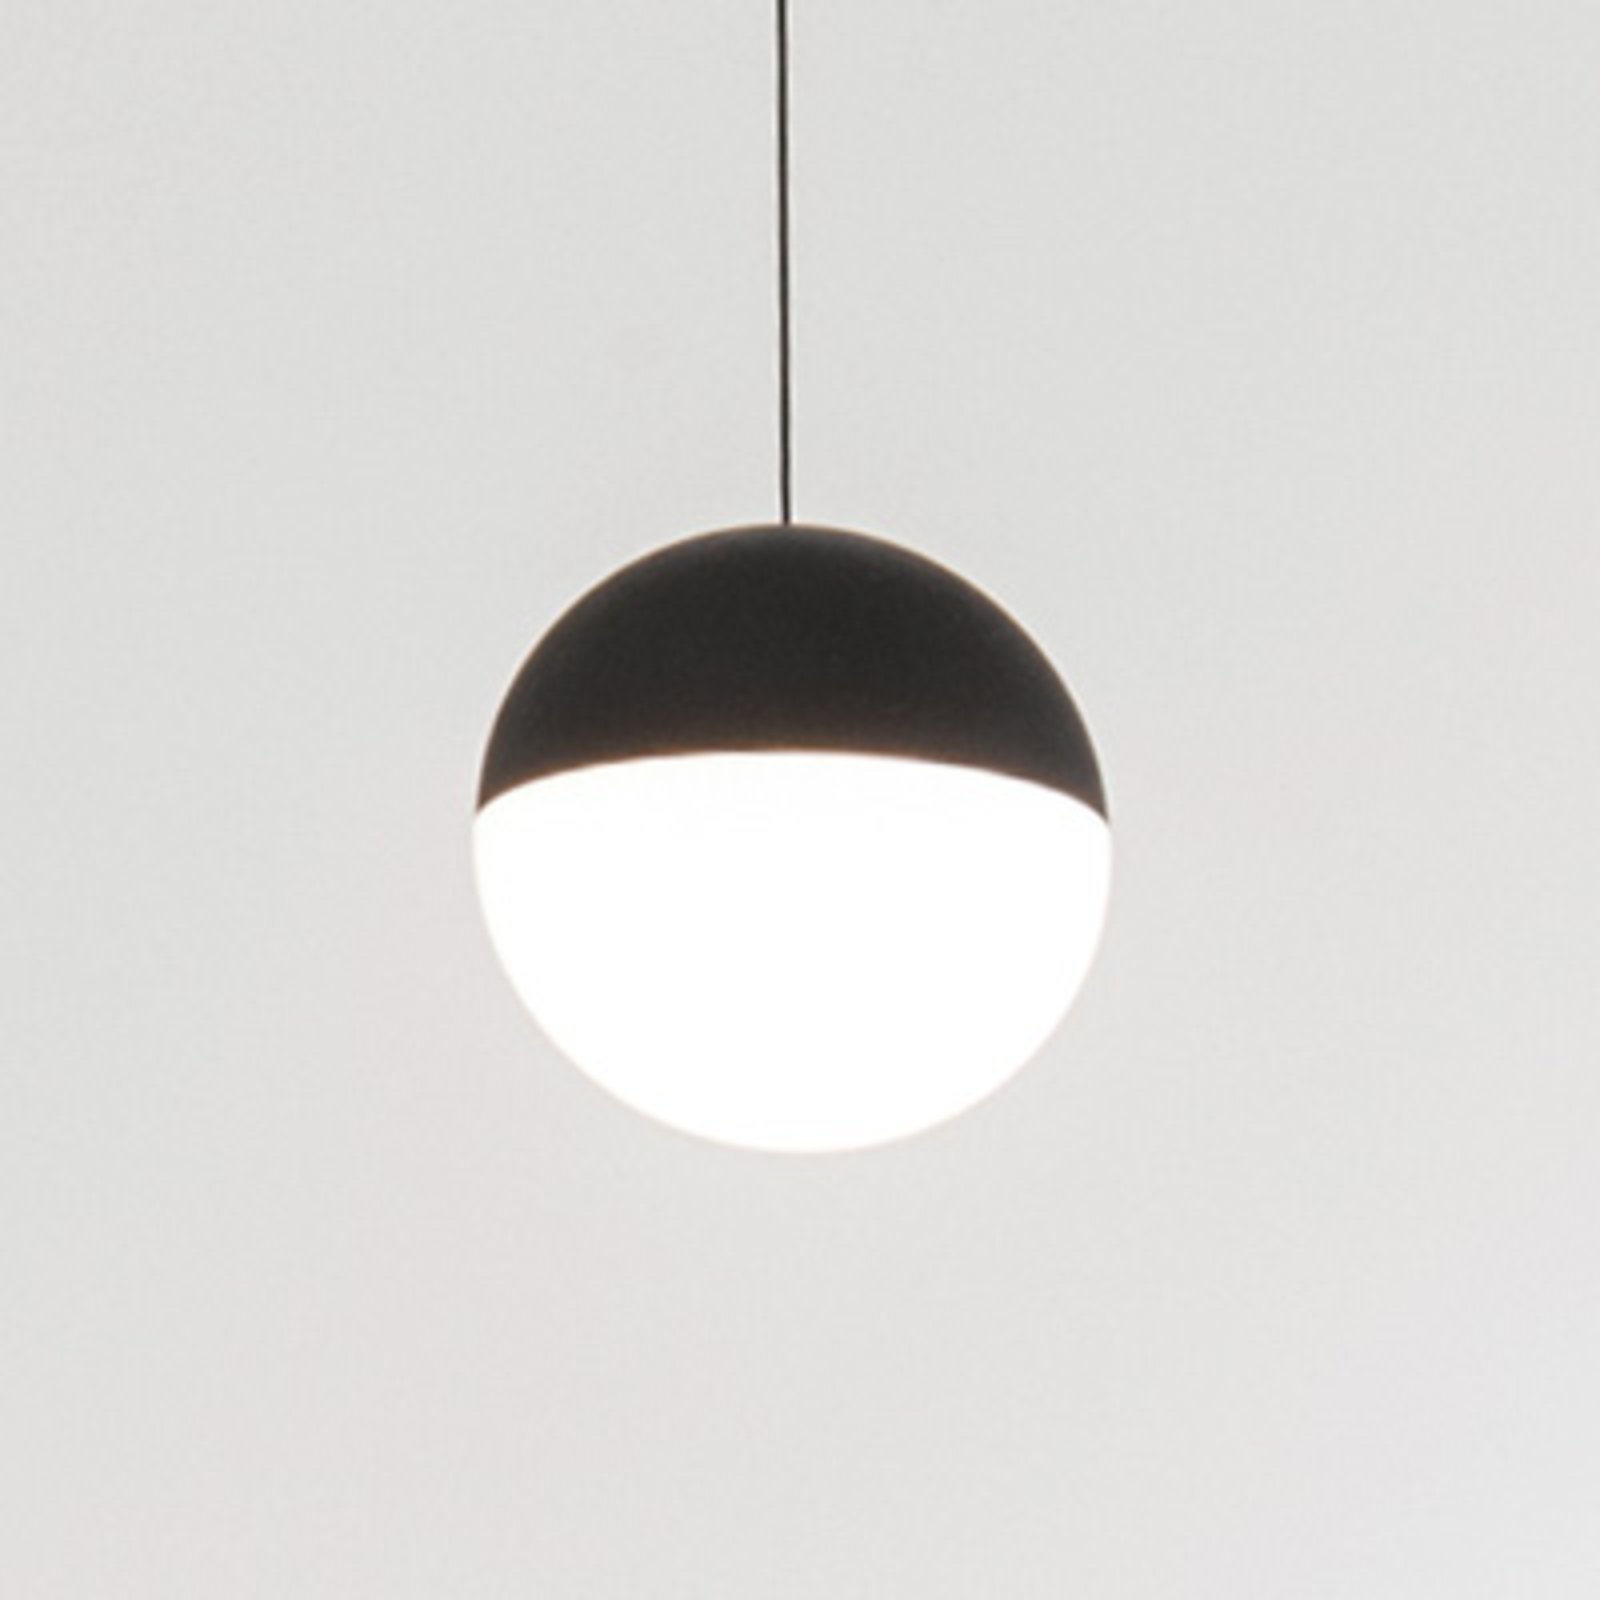 FLOS String light hanging light, 12m cable, sphere